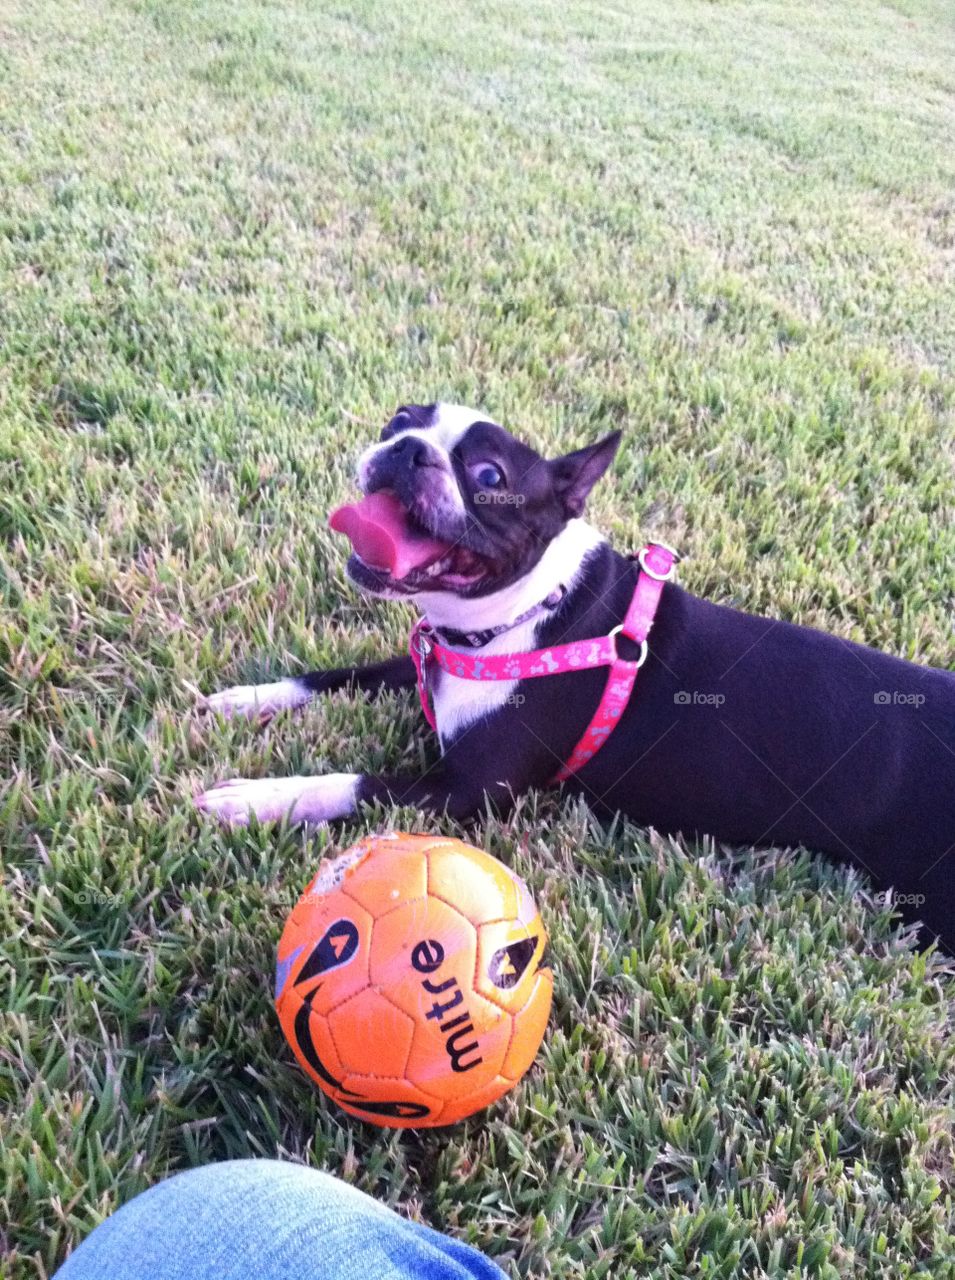 Lily playing with her soccer ball at the dog park